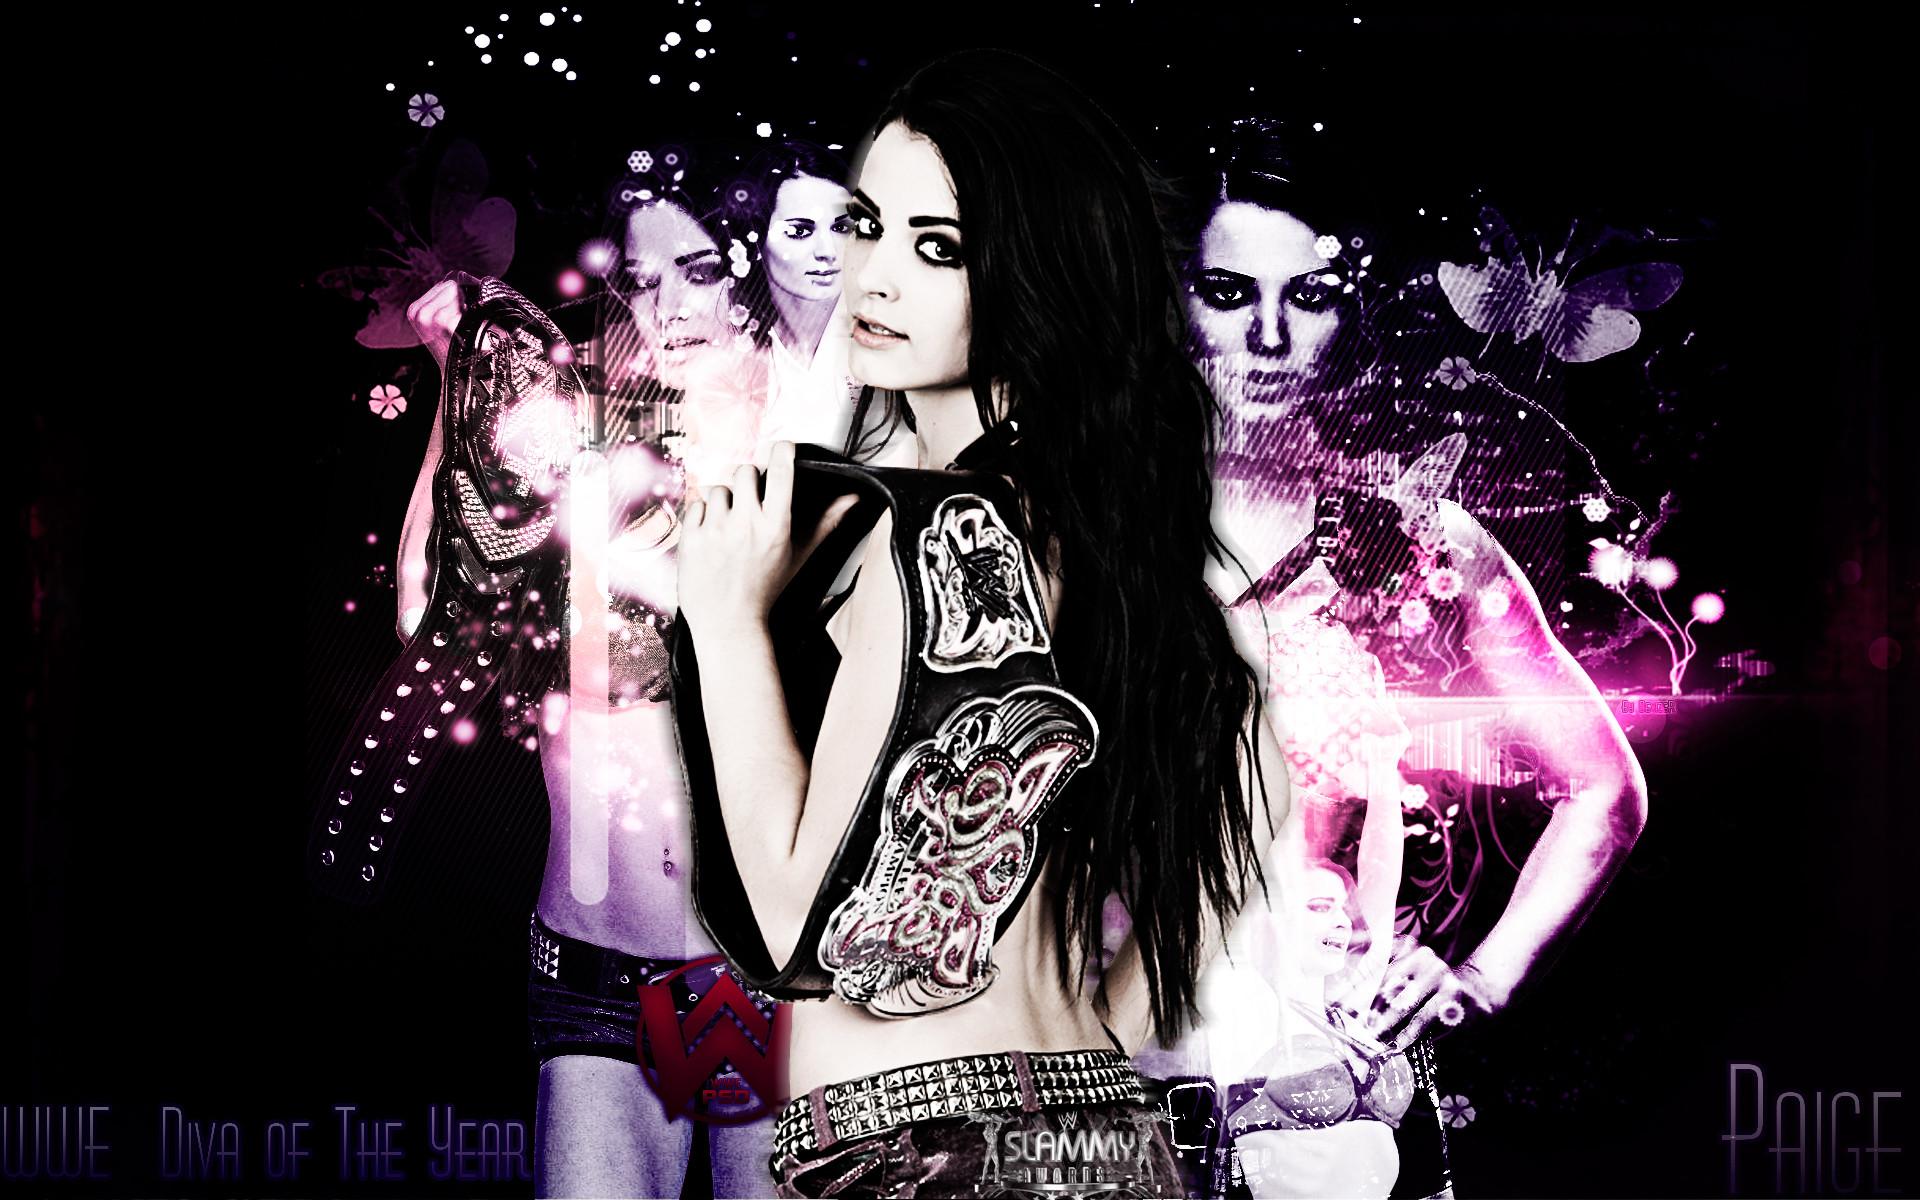 Paige Wwe Wallpaper background picture